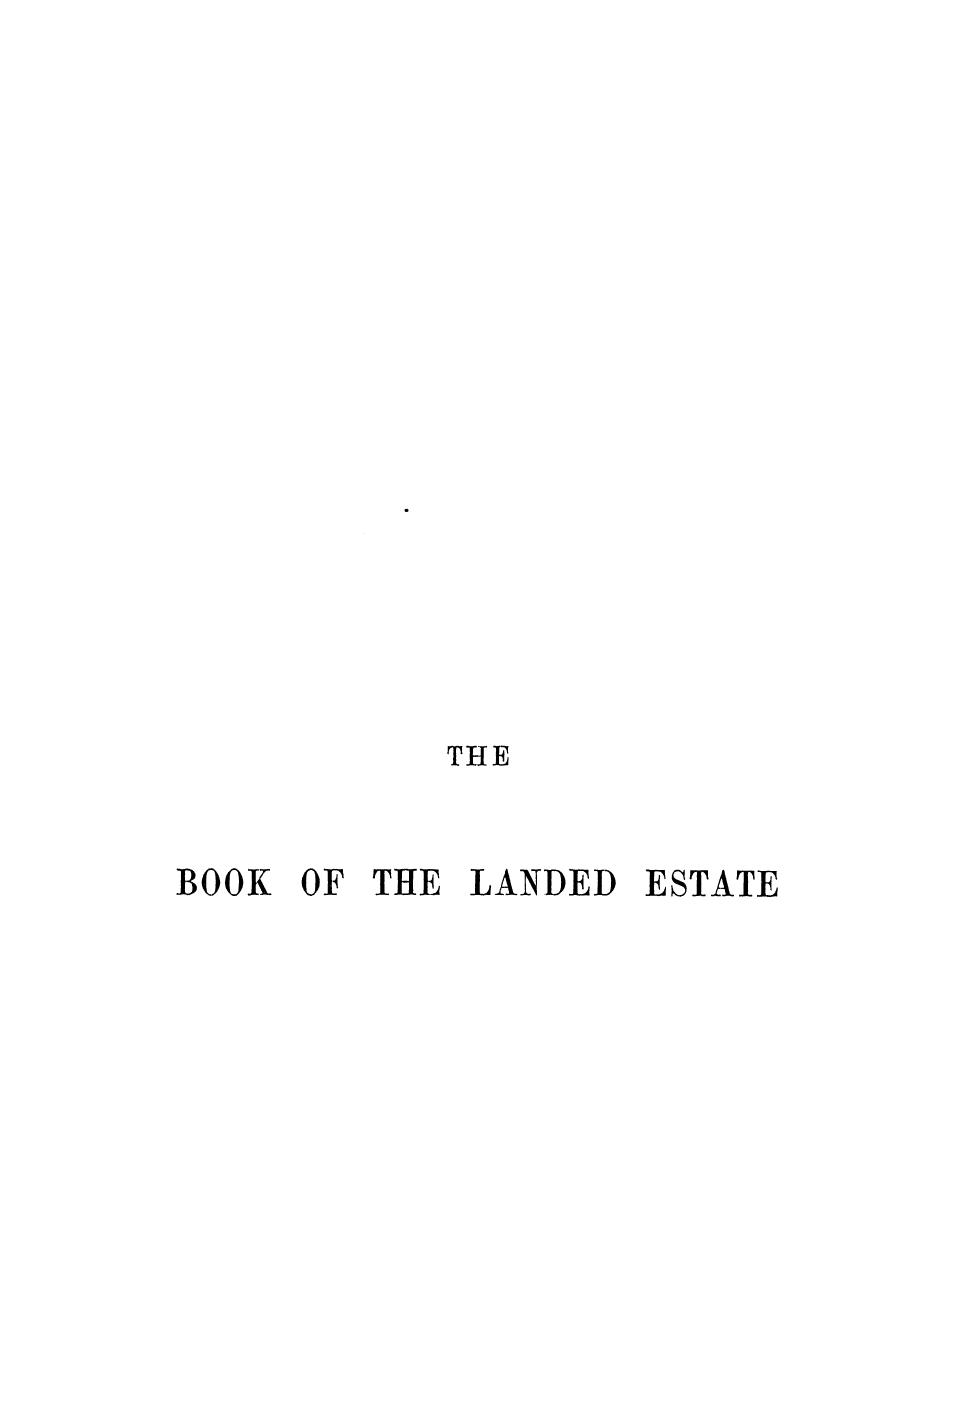 Brown R.E., BY Robert E. Brown - The book of the landed estate by 1869